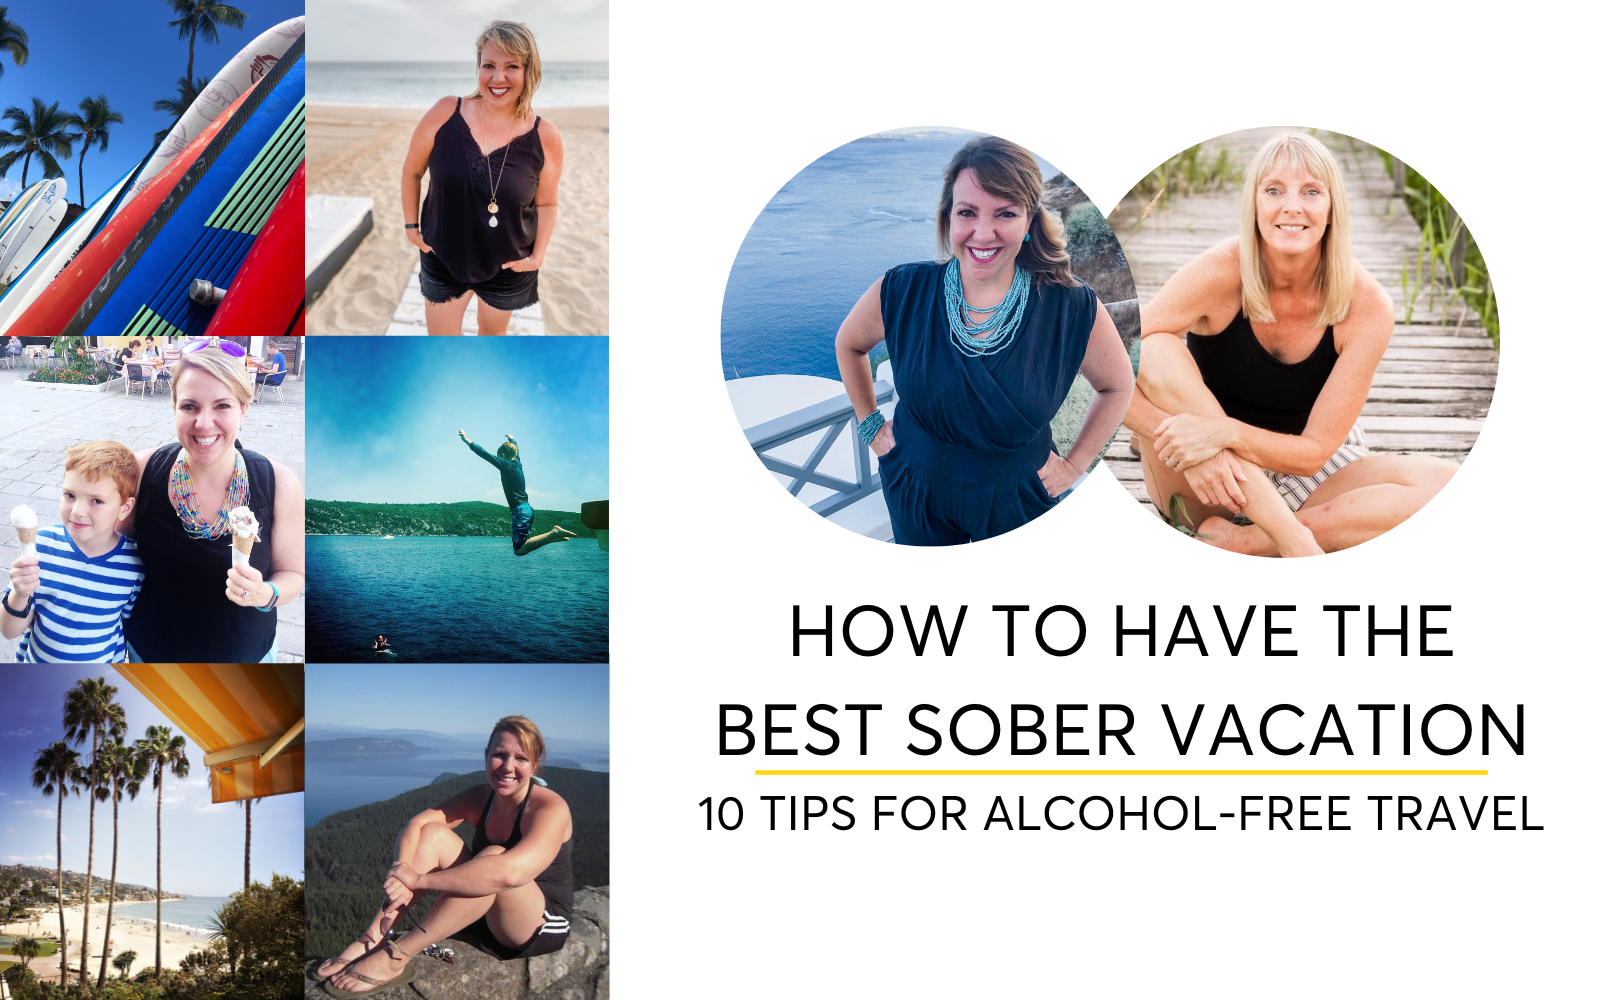 How To Have The Best Sober Vacation